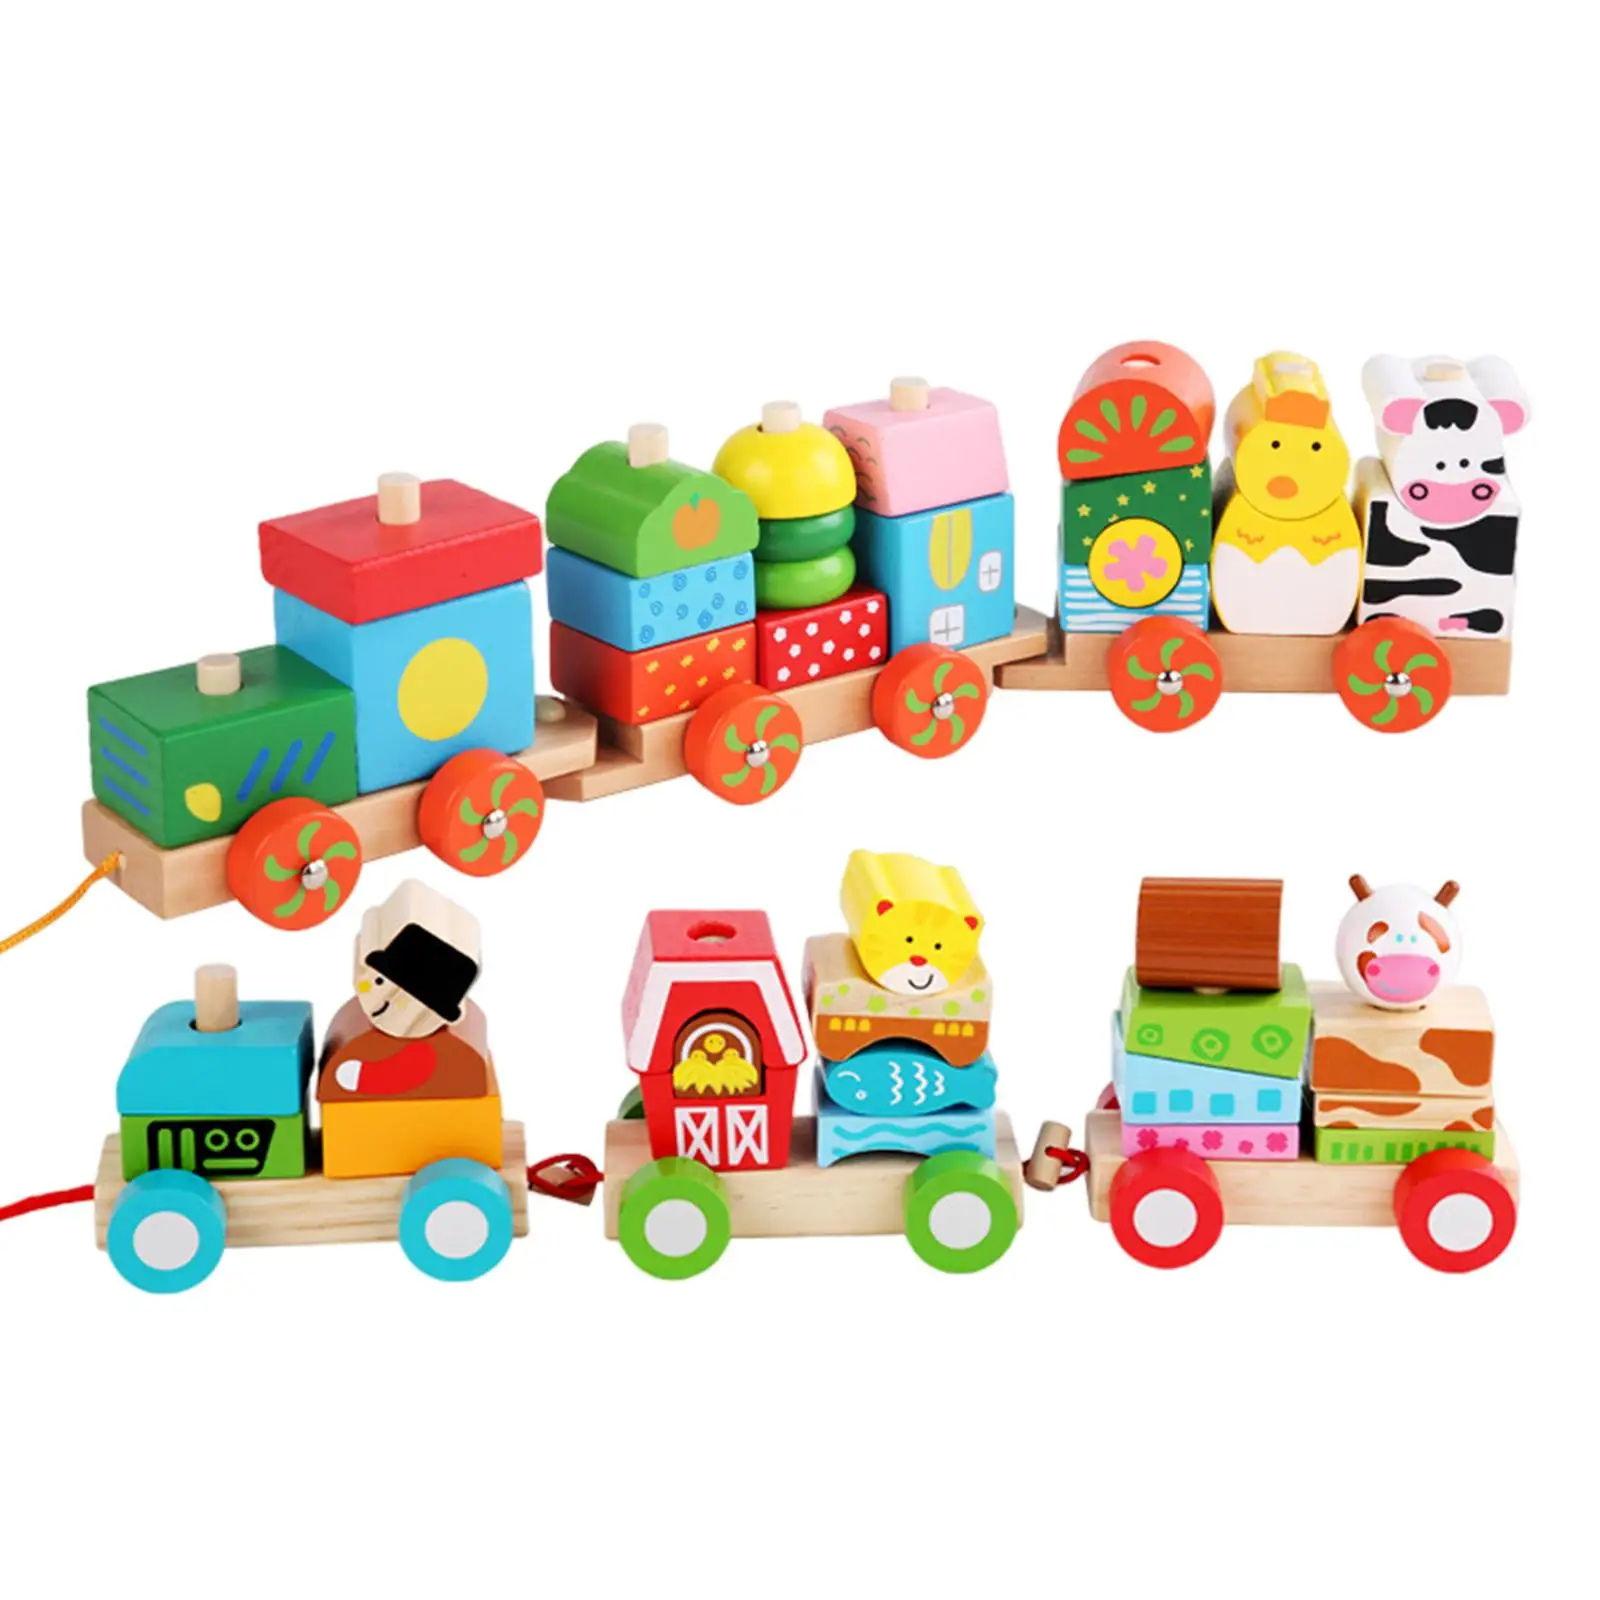 Wooden Small Trains, Smooth Attractive Fun Classic Wooden Toy,Baby Toys Wood Train, for Kids